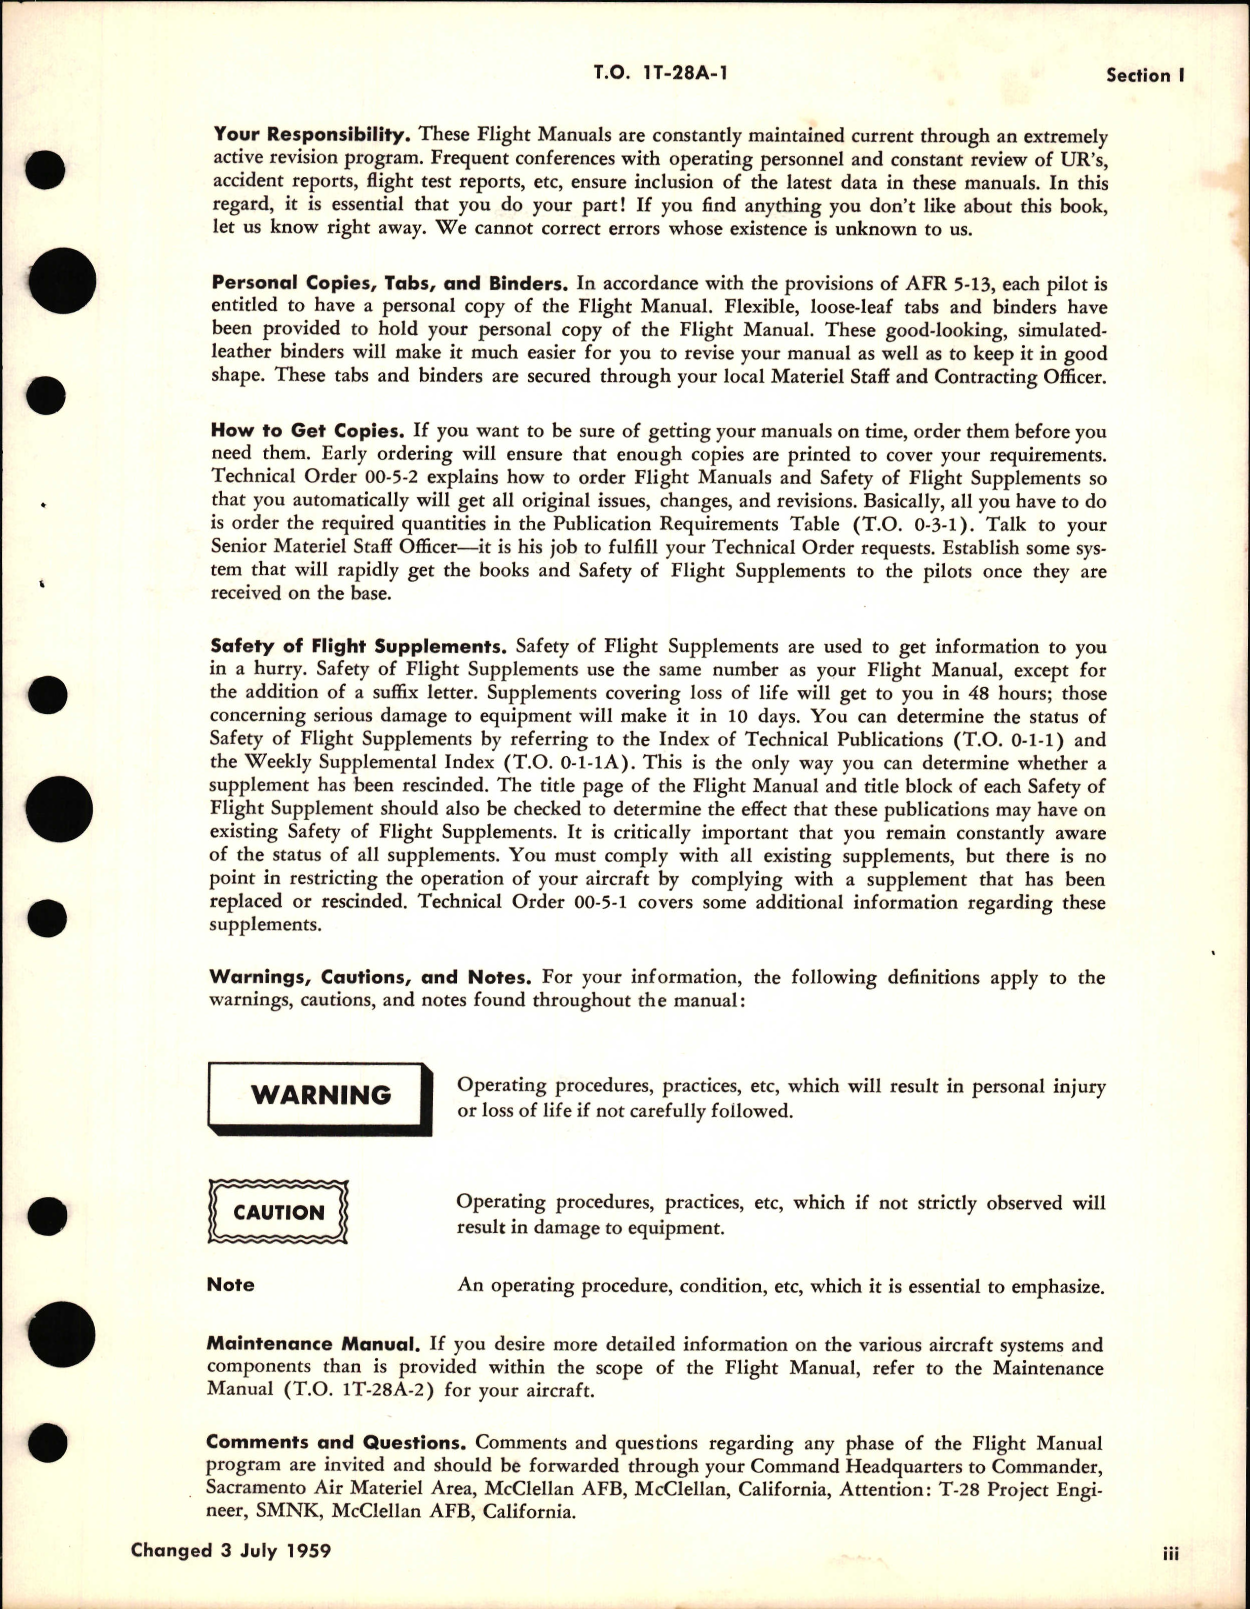 Sample page 5 from AirCorps Library document: Flight Manual for T-28A